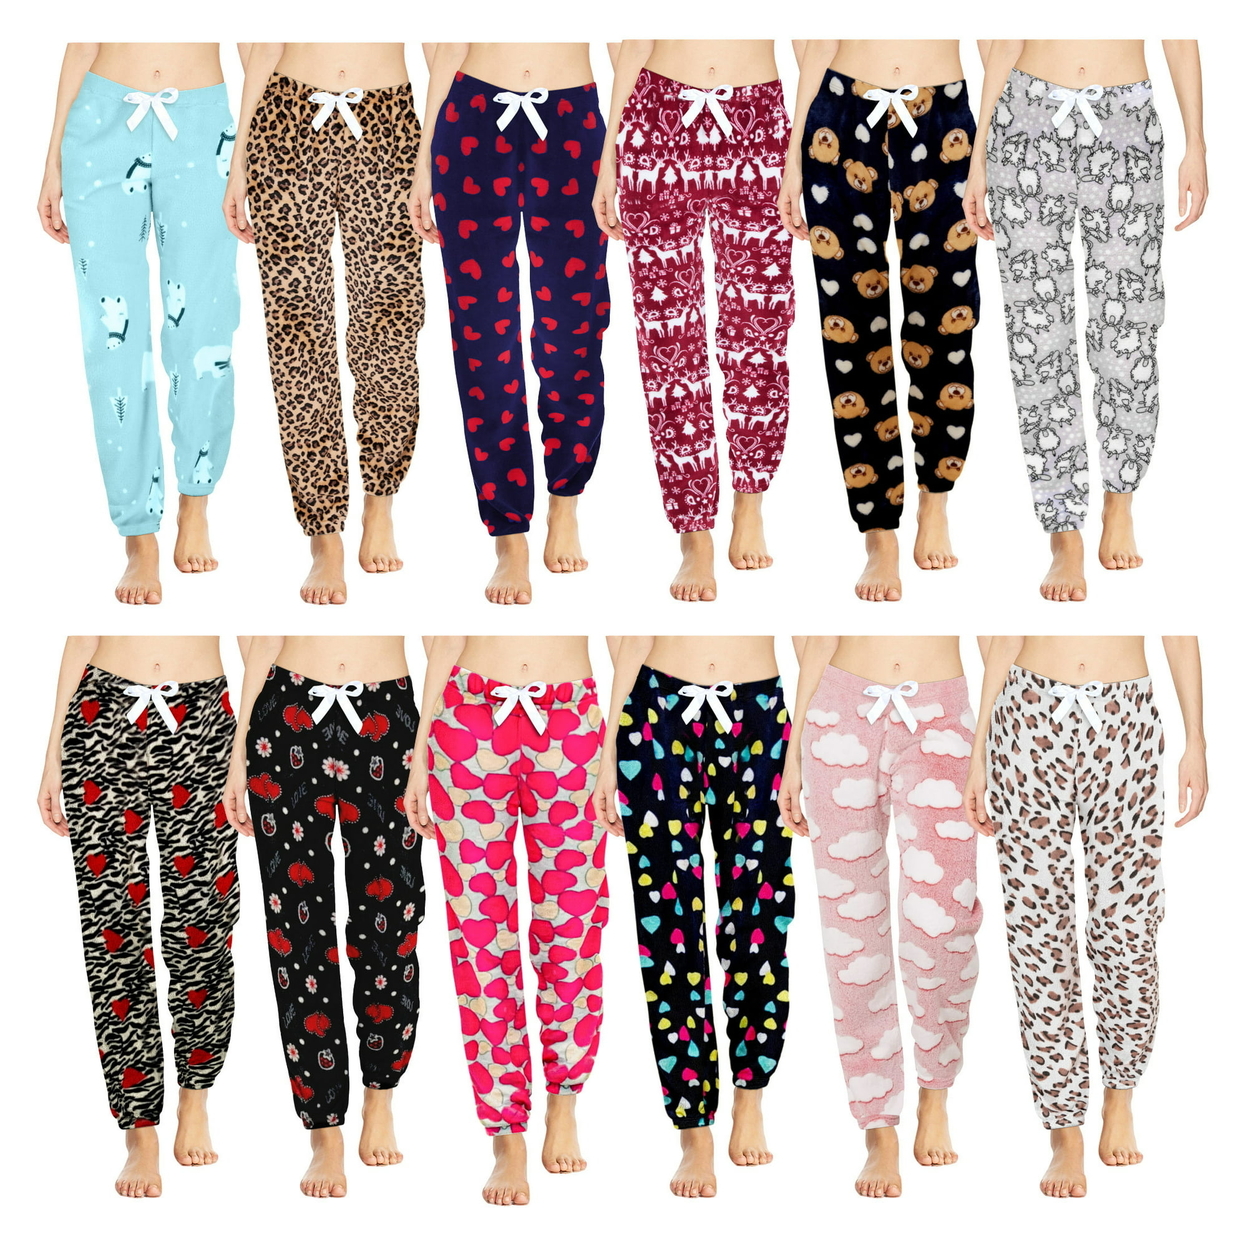 4-Pack: Women's Printed Ultra-Soft Comfy Stretch Micro-Fleece Pajama Lounge Pants - Large, Shapes